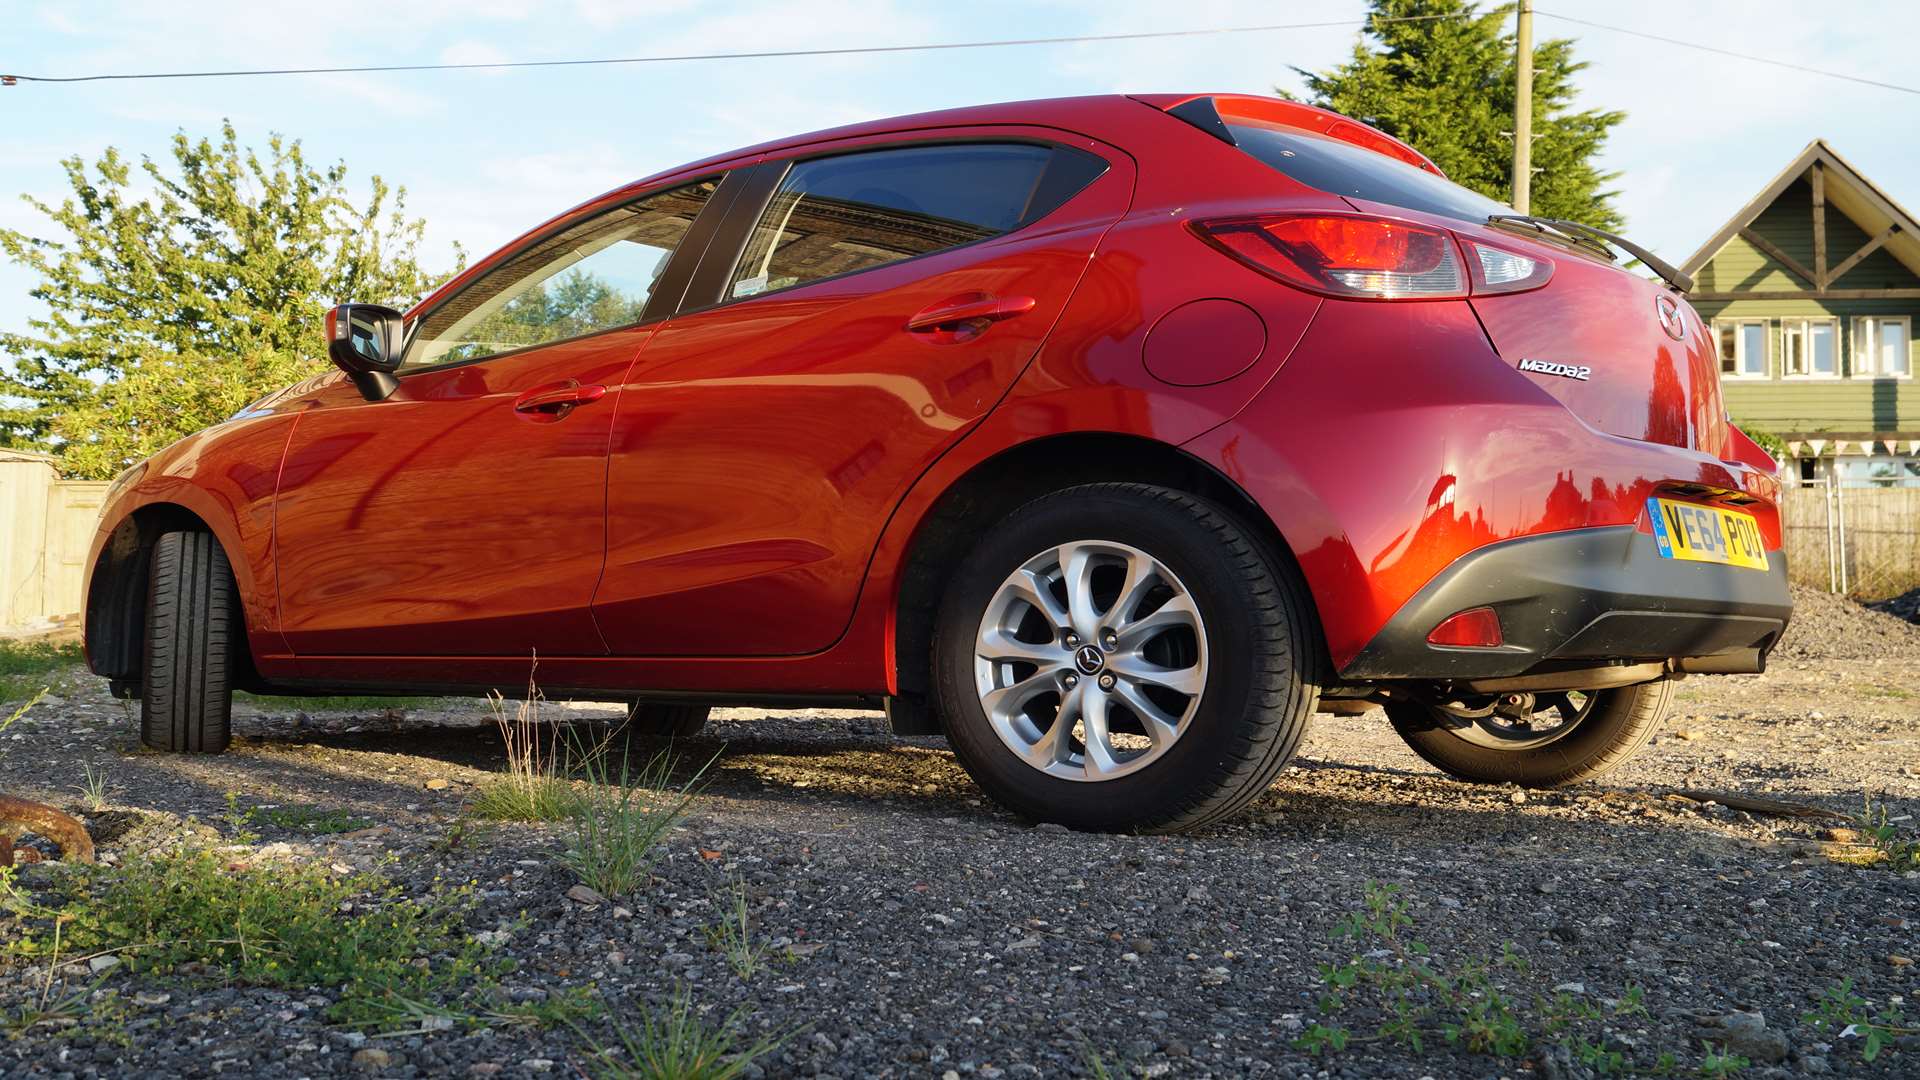 The rear of the Mazda2 is, perhaps, the least satisfactory design element